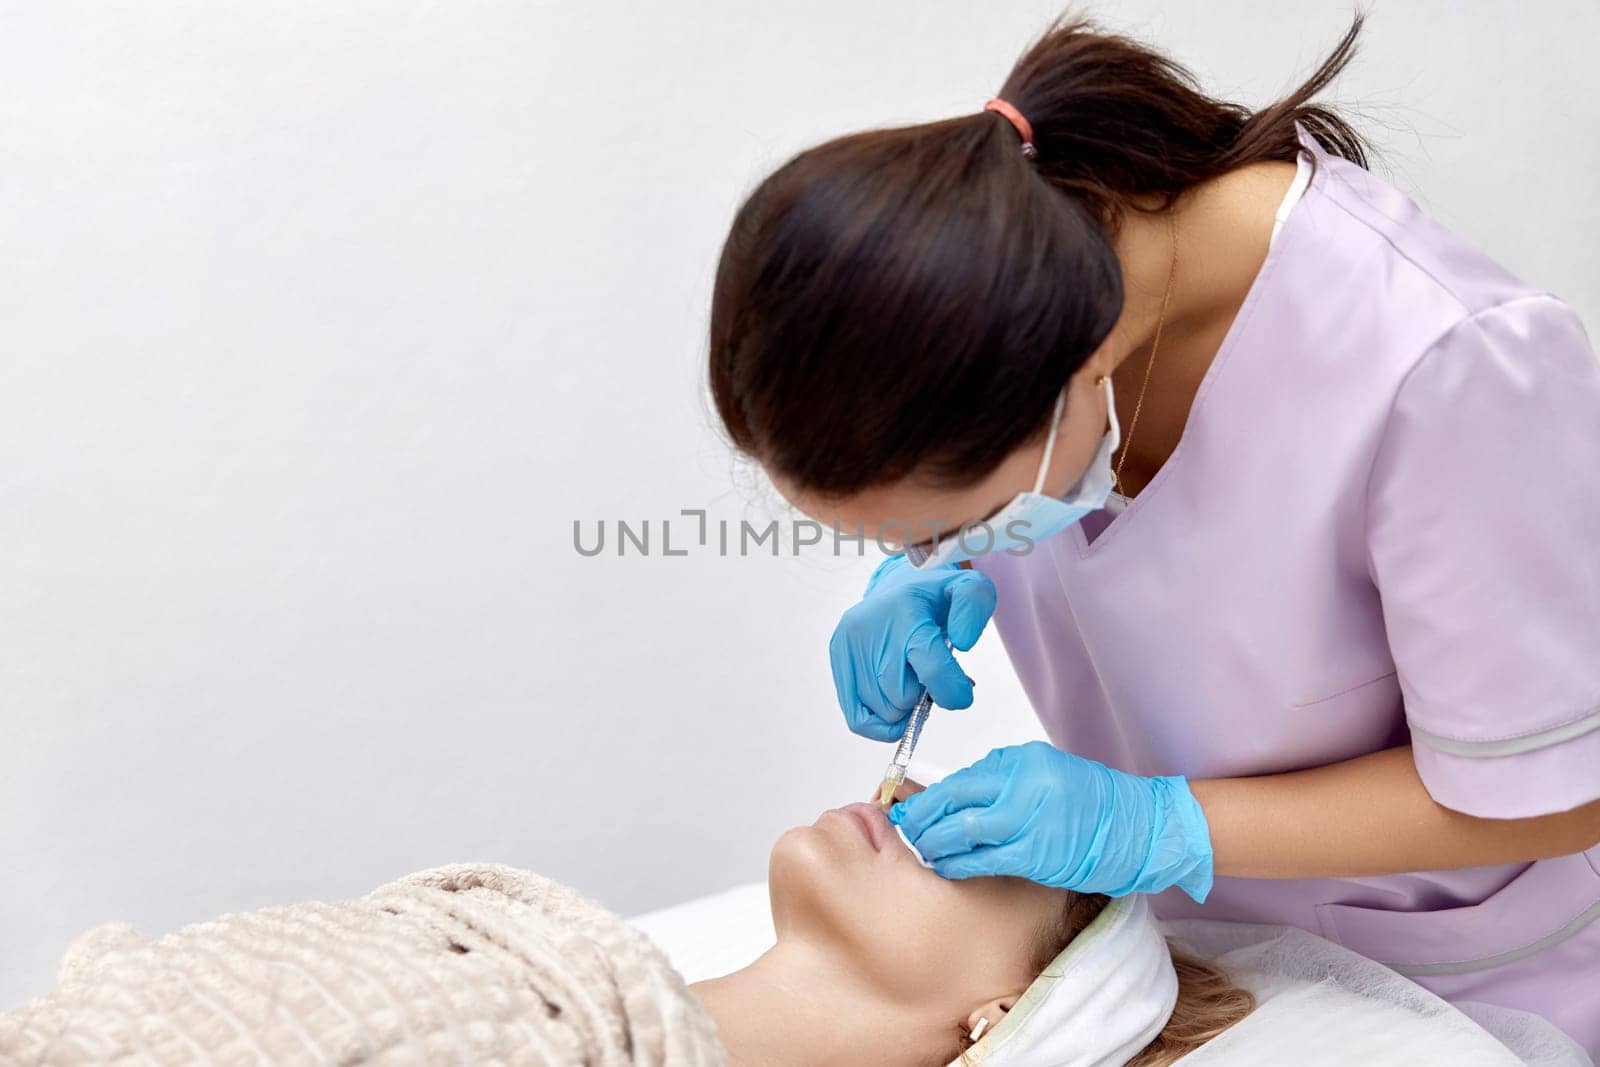 beautician makes injections to enlarge the lips of beautiful woman. procedure lip augmentation